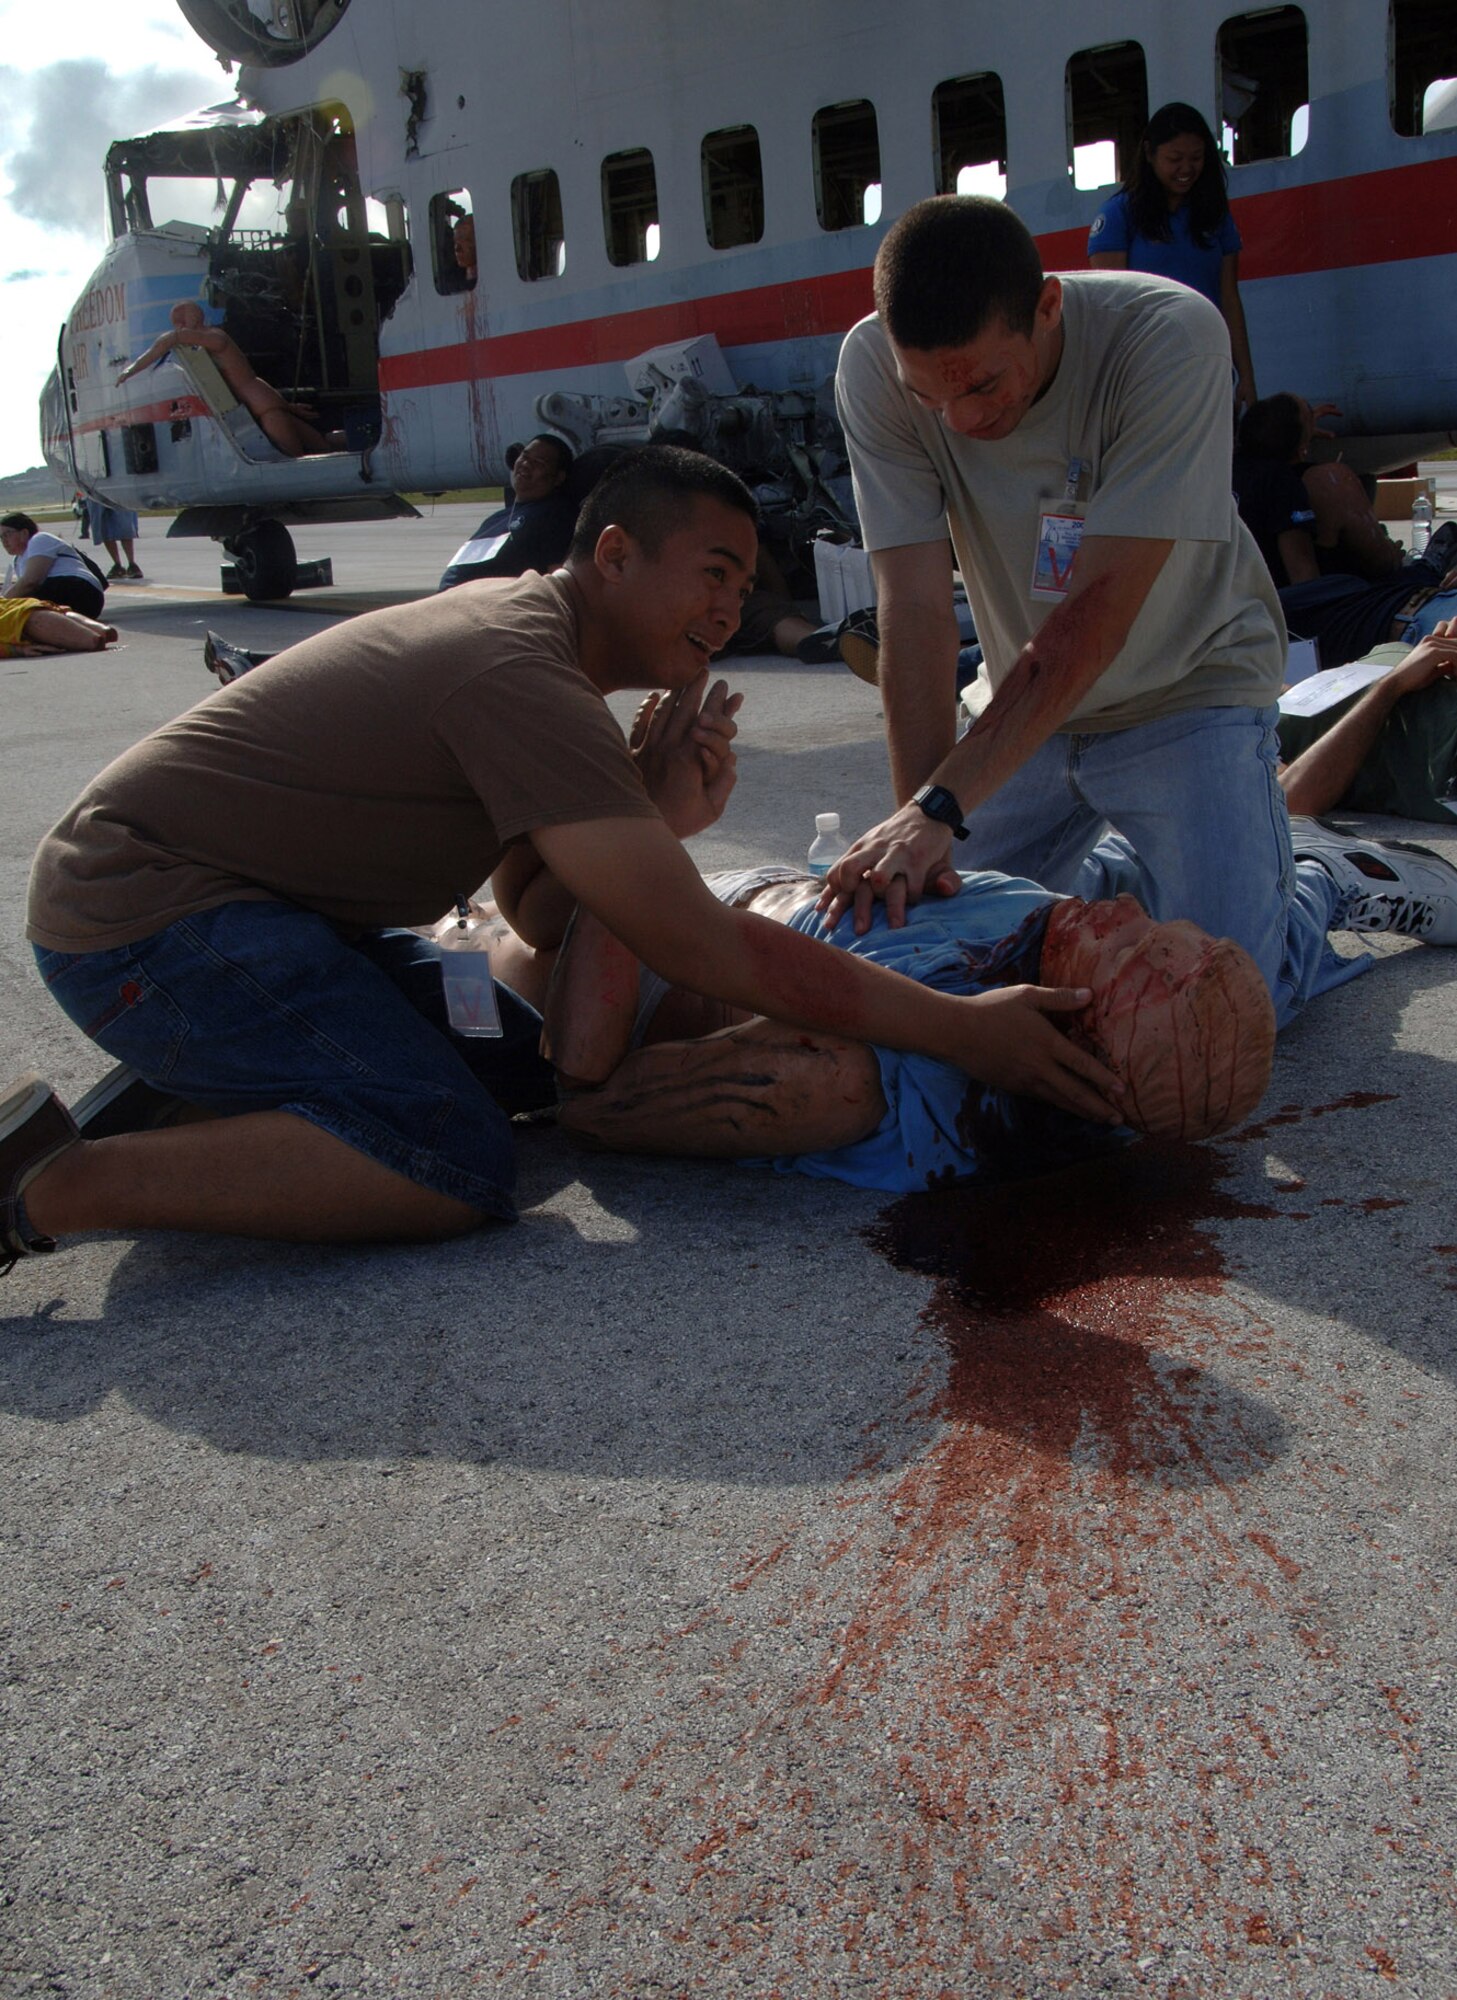 U.S. Air Force Airman First Class Edward Estillore and Airman Michael Purdy practice CPR during this years Full Scale Disaster Drill Exercise at Guam International Airport on June 6, 2008. A1C Estillore and Am Purdy  volunteered to help out with this exercise.  (U.S. Air Force photo by Airman 1st Class Courtney Witt)